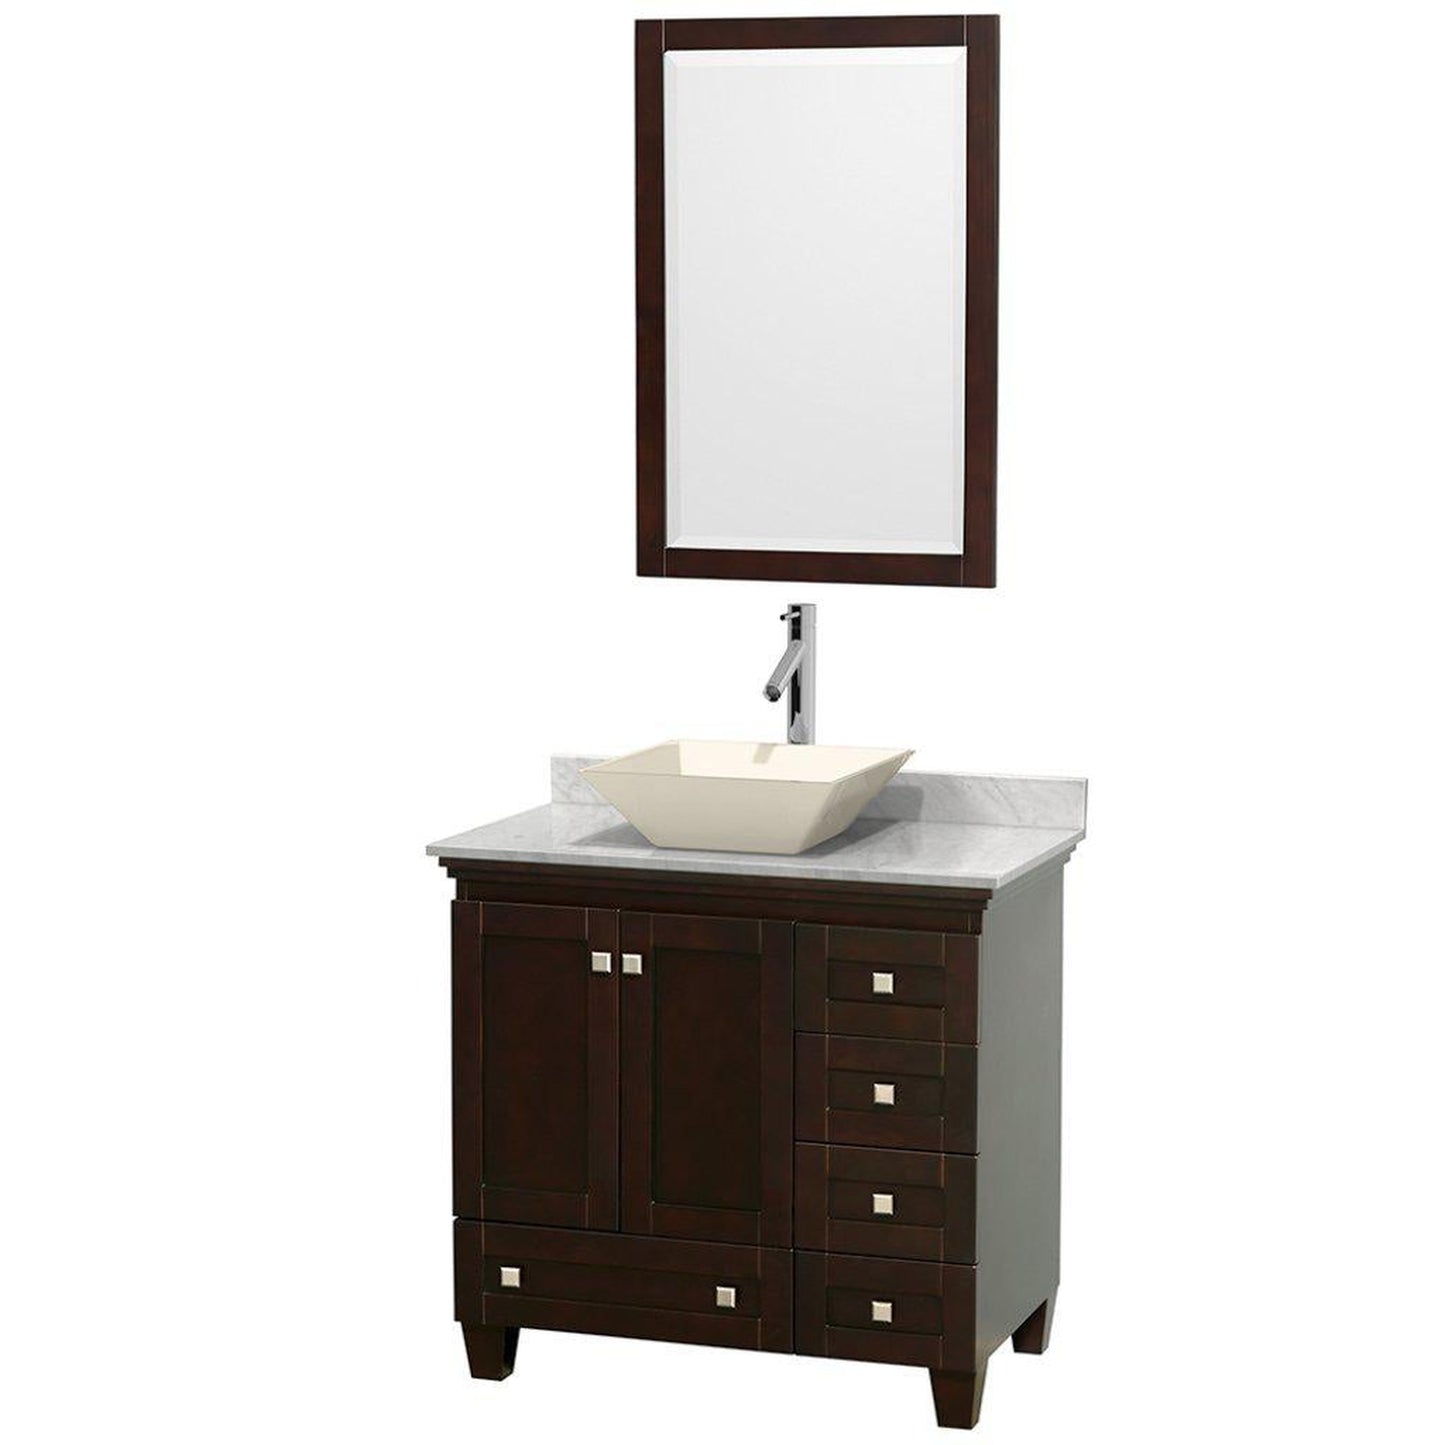 Wyndham Collection Acclaim 36" Single Bathroom Espresso Vanity Set With White Carrara Marble Countertop, Pyra Bone Porcelain Sink, and 24" Mirror